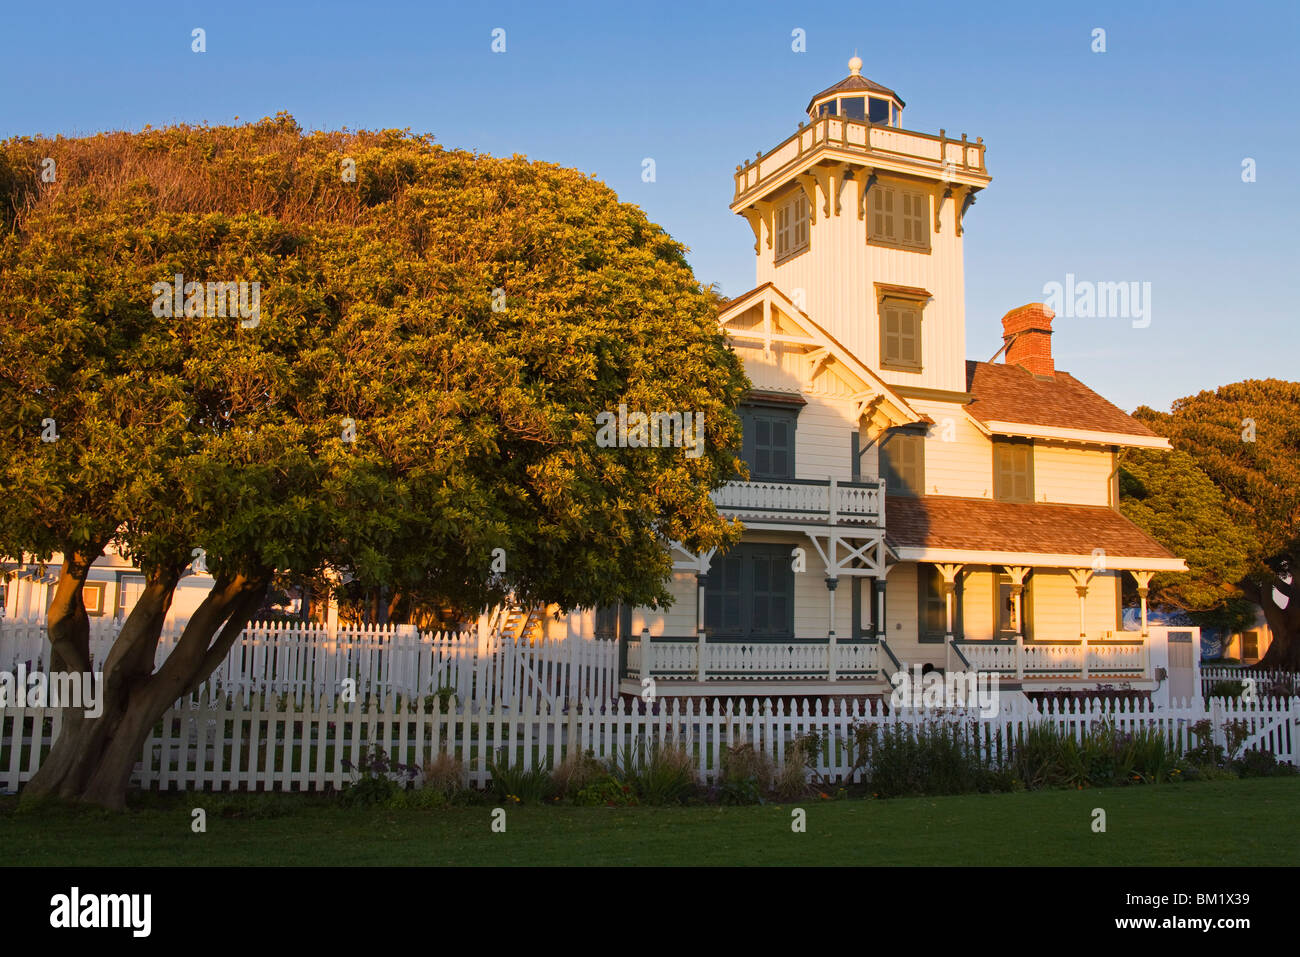 Point Fermin Lighthouse, San Pedro, Los Angeles, California, United States of America, North America Stock Photo